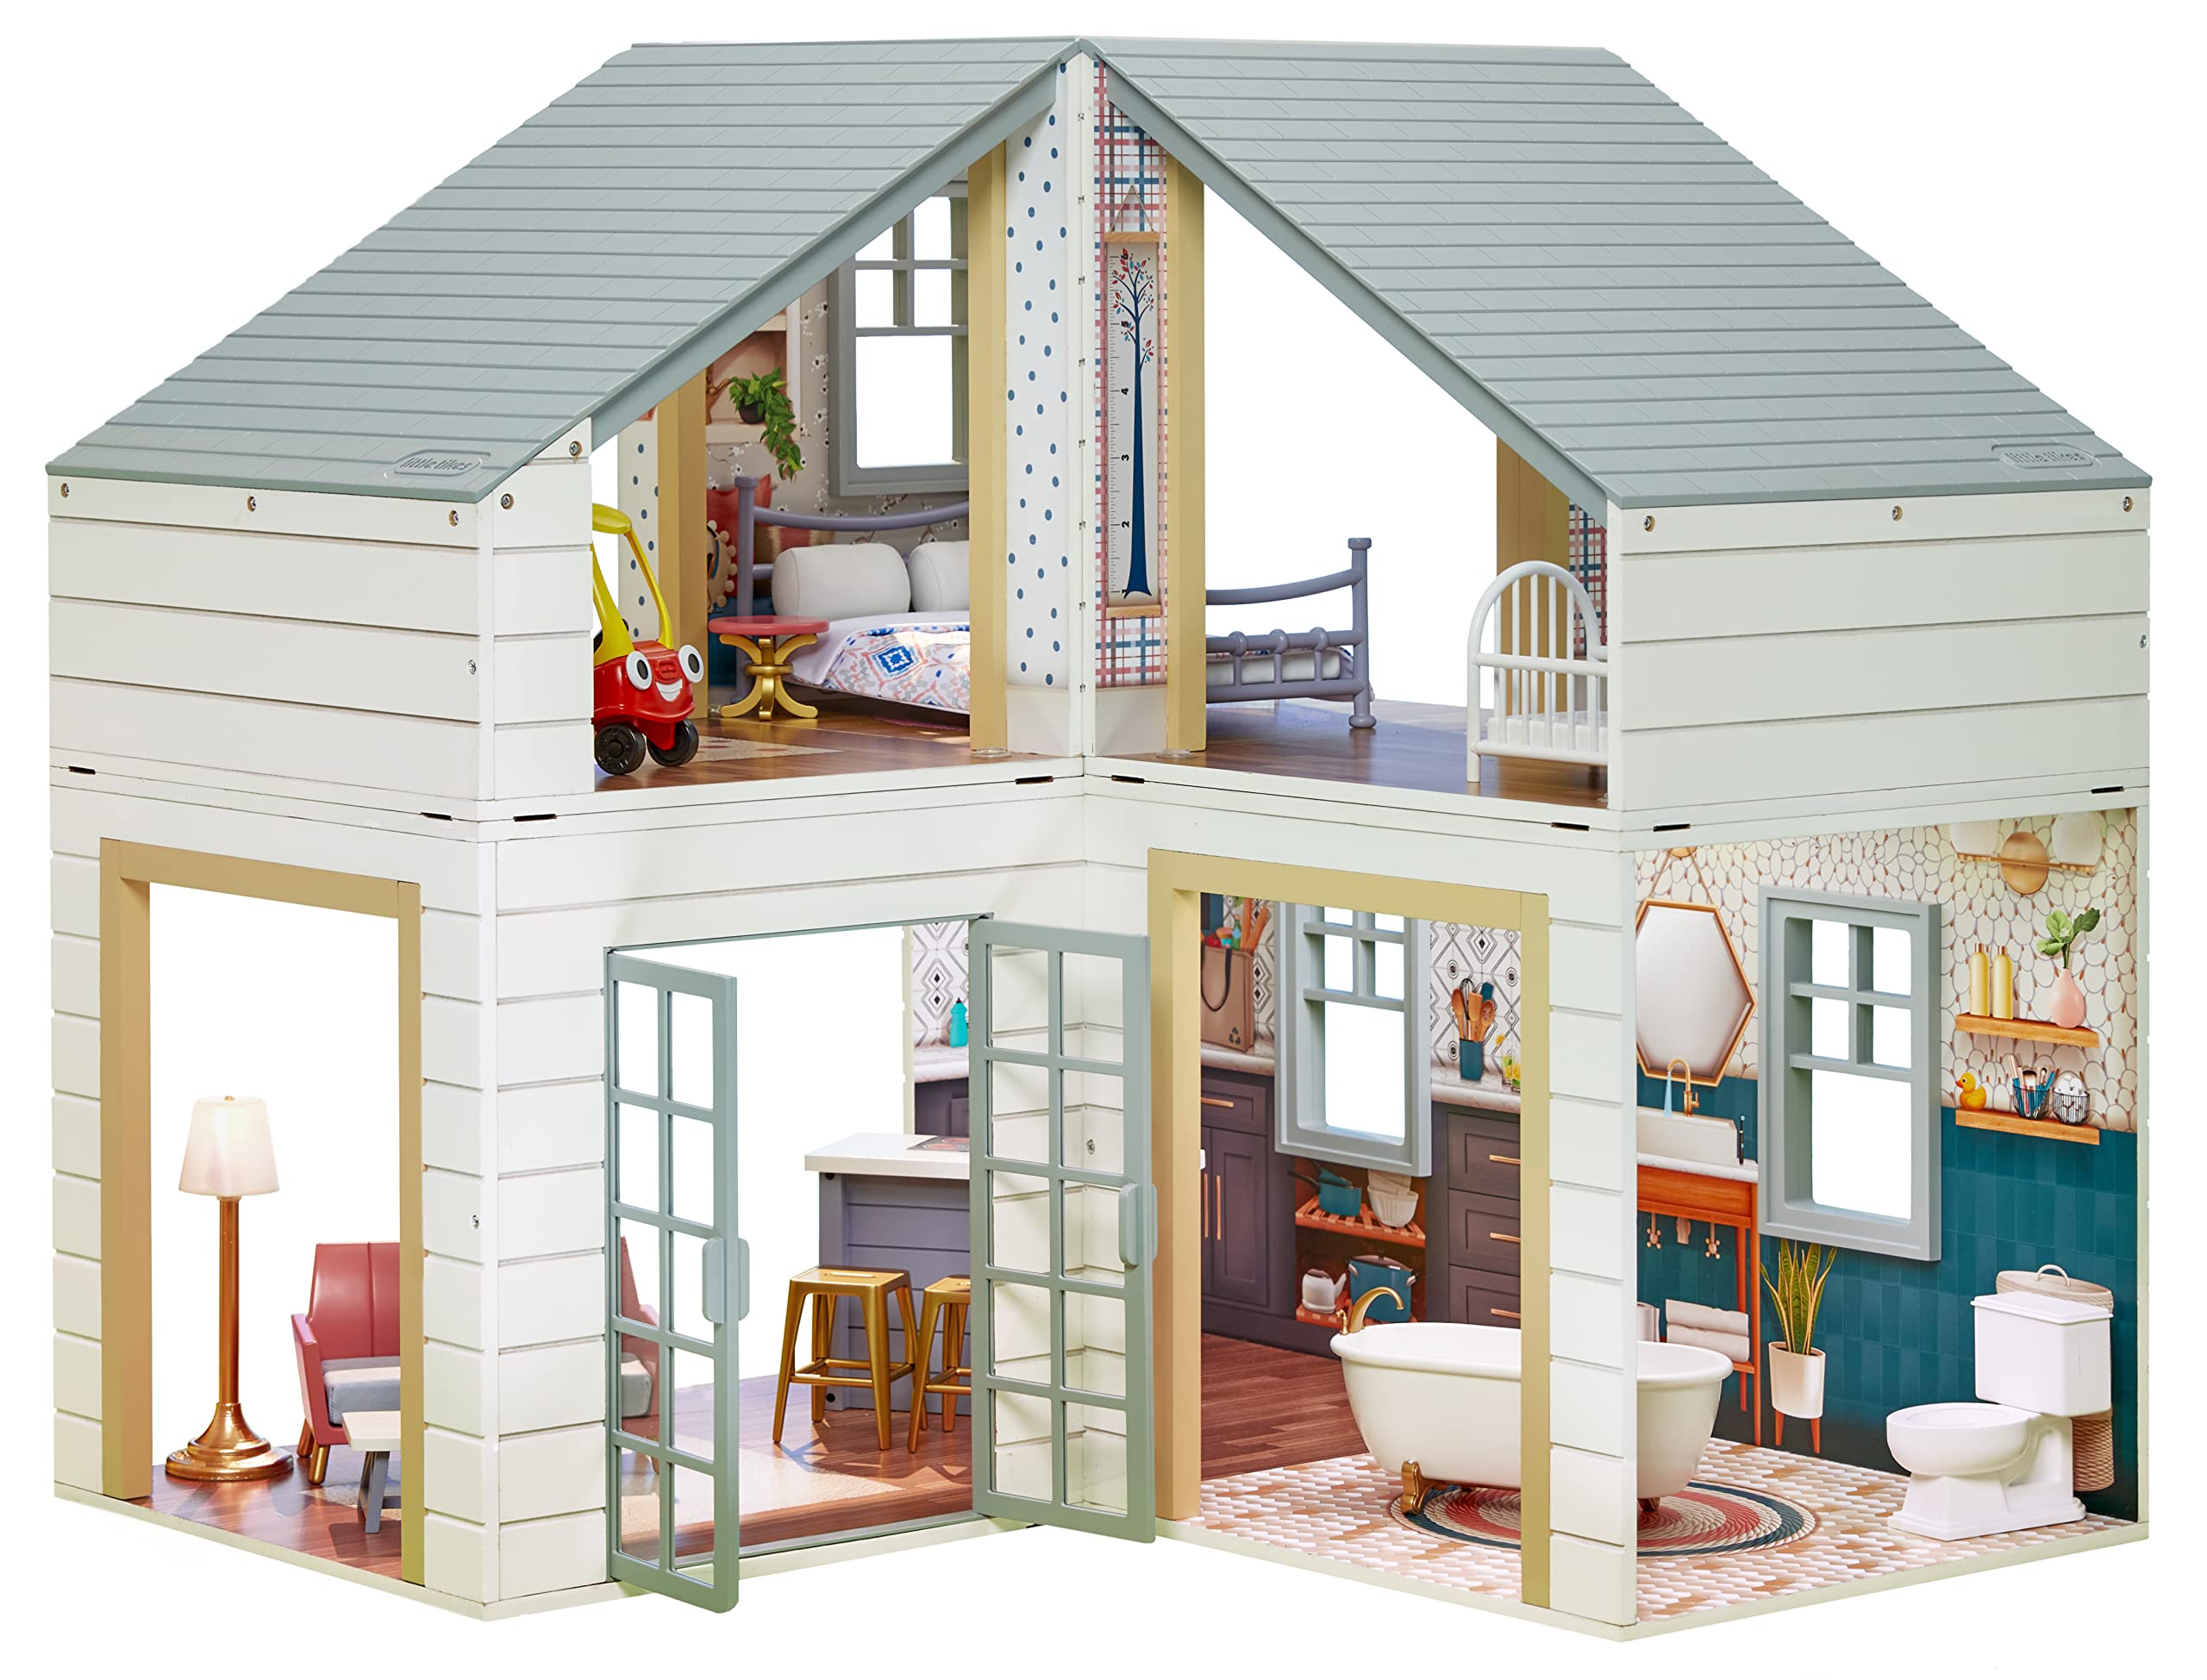 Little Tikes Real Wood Stack ‘n Style Dollhouse w/ Cozy Coup & Accessories $109.93 + Free Shipping